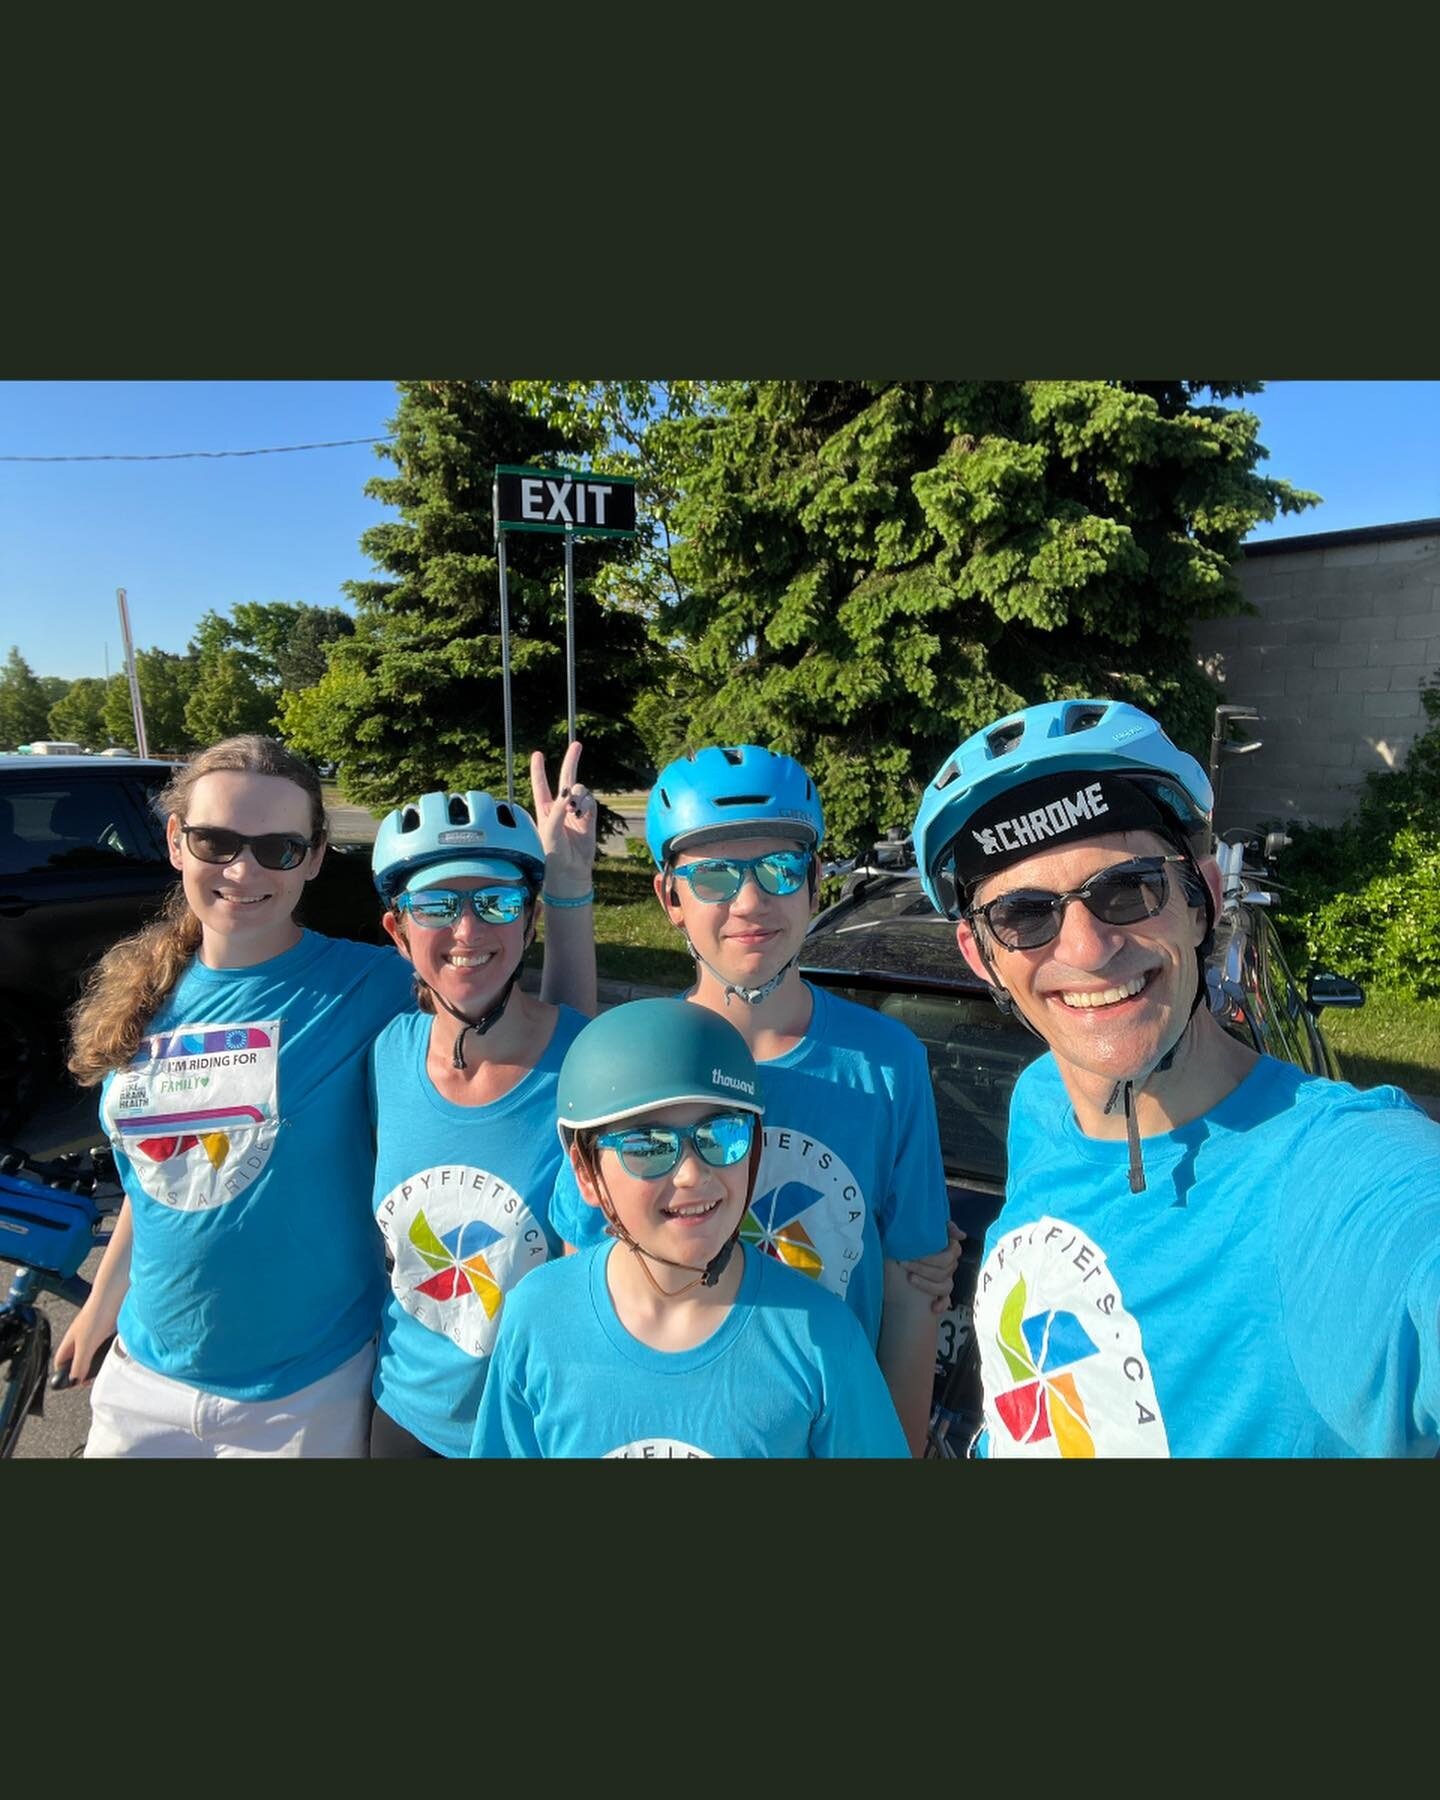 Team Happy Fiets had a wonderful time riding on the car-free Gardiner and DVP. Here&rsquo;s to more bikes and fewer cars in our cities! #BaycrestRideForBrainHealth #FamilyBiking